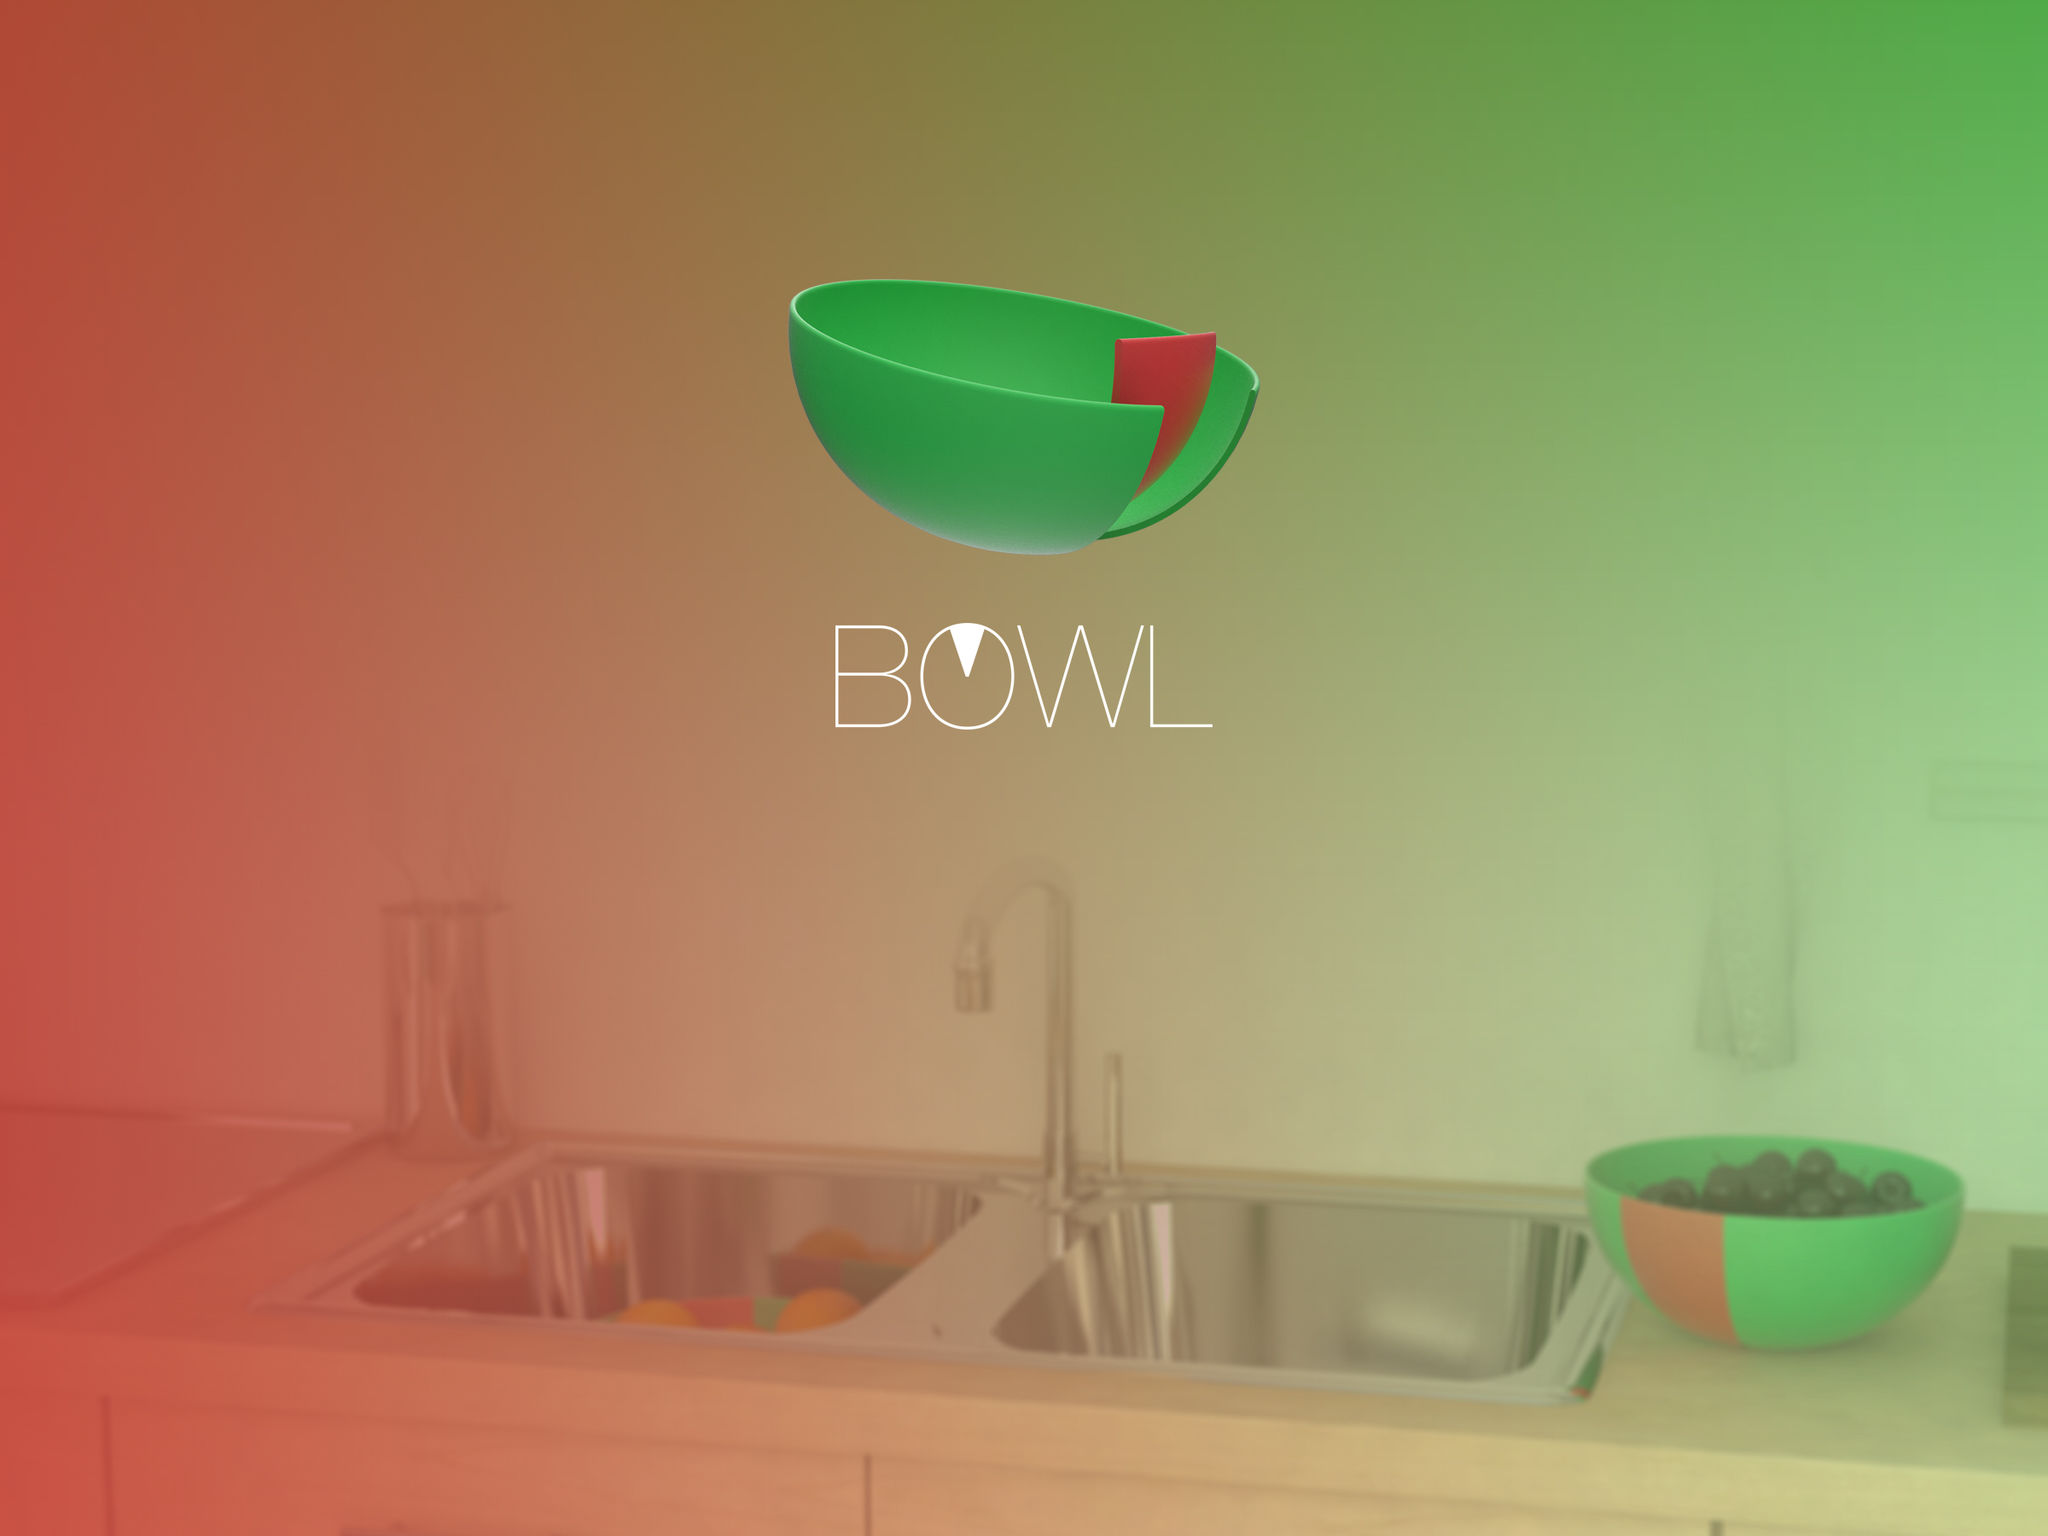 bowl meaning